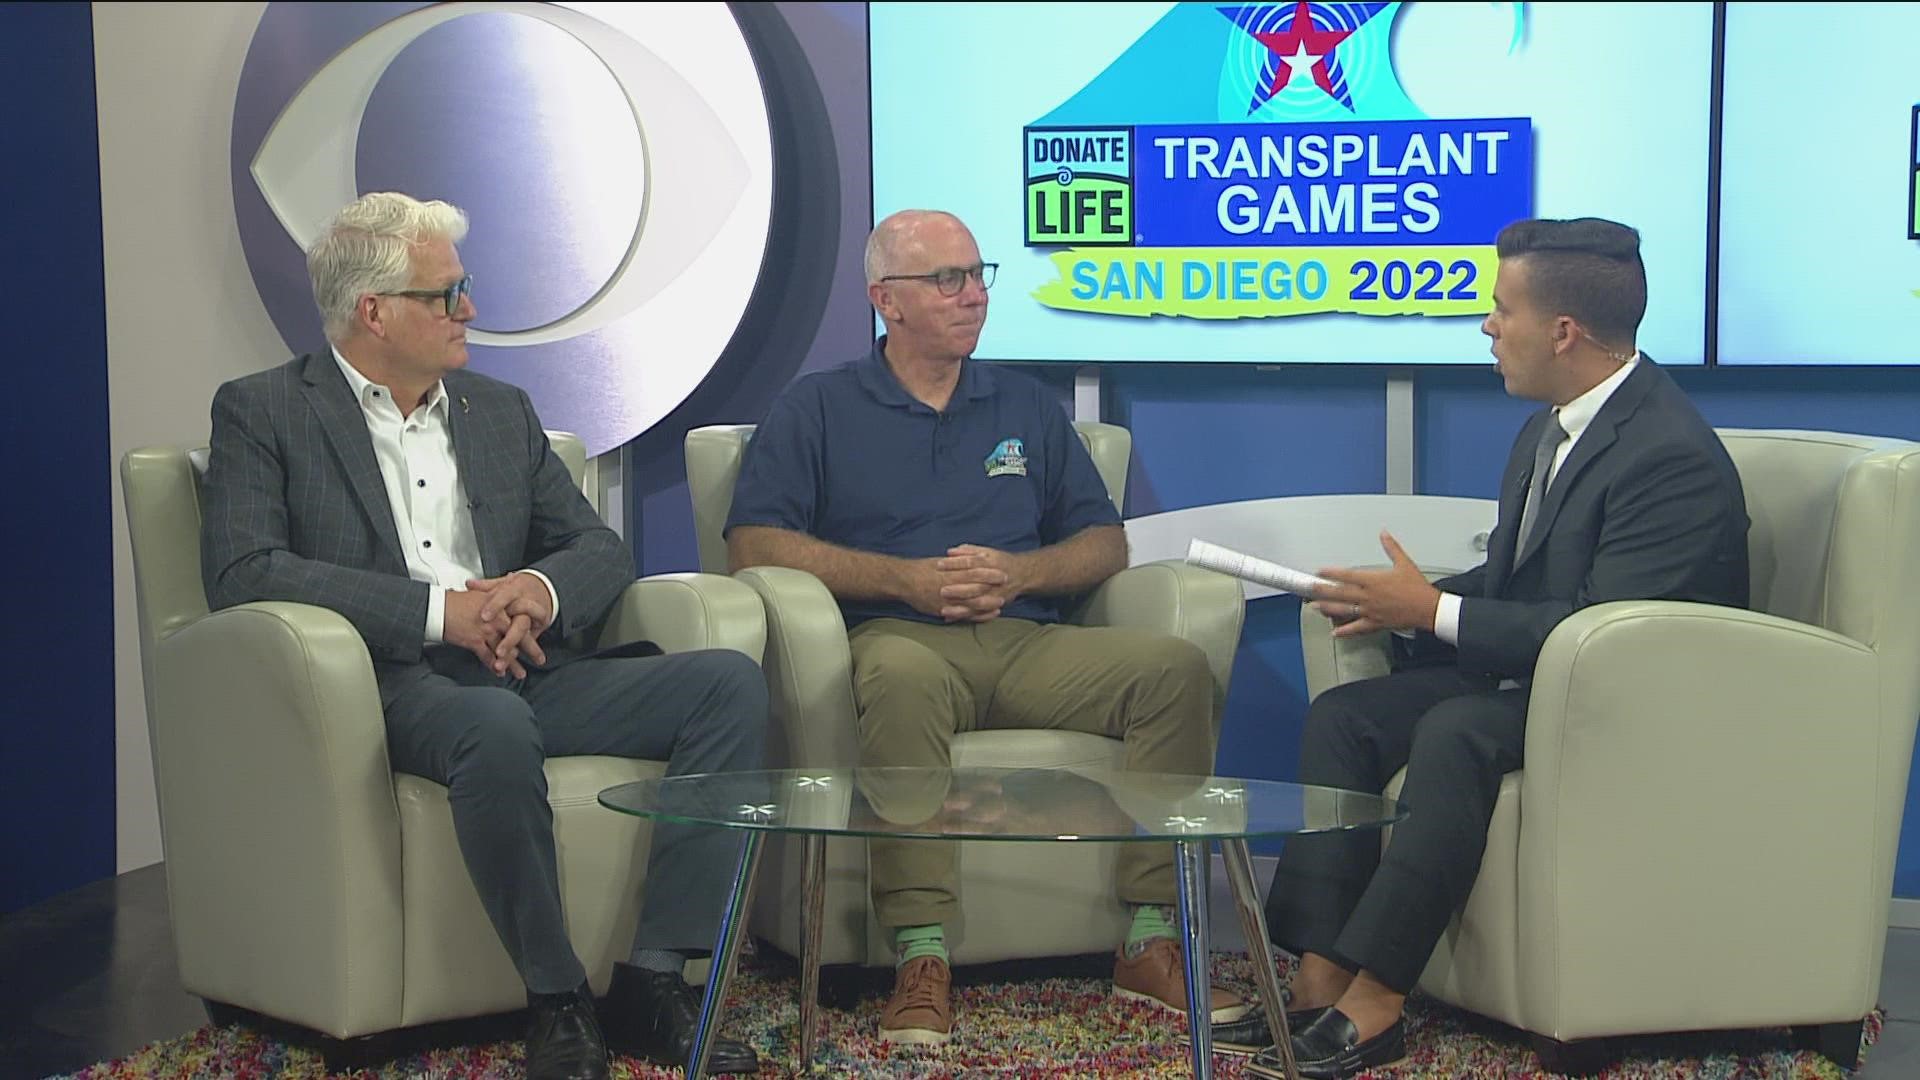 San Diego is set to host the 2022 Donate Life Transplant Games of America. Rady Children's Hospital is hosting a parade Saturday.